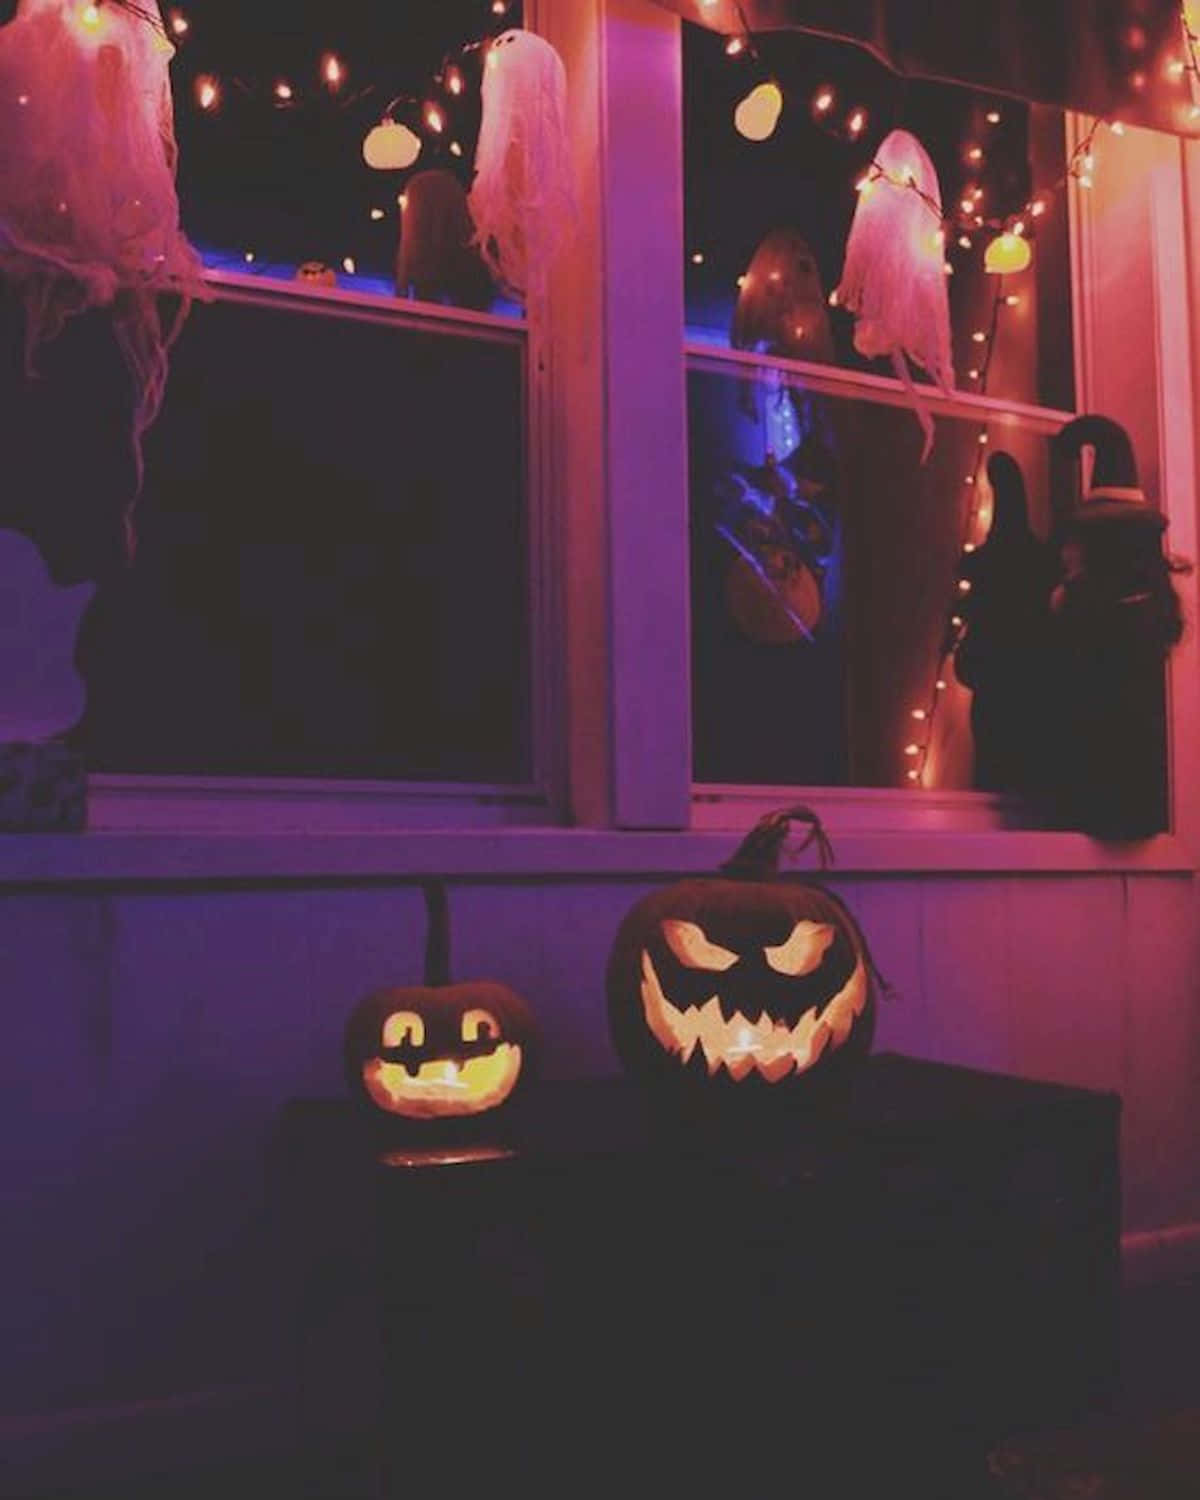 'Spooky yet beautiful - welcome to the Halloween aesthetic.'